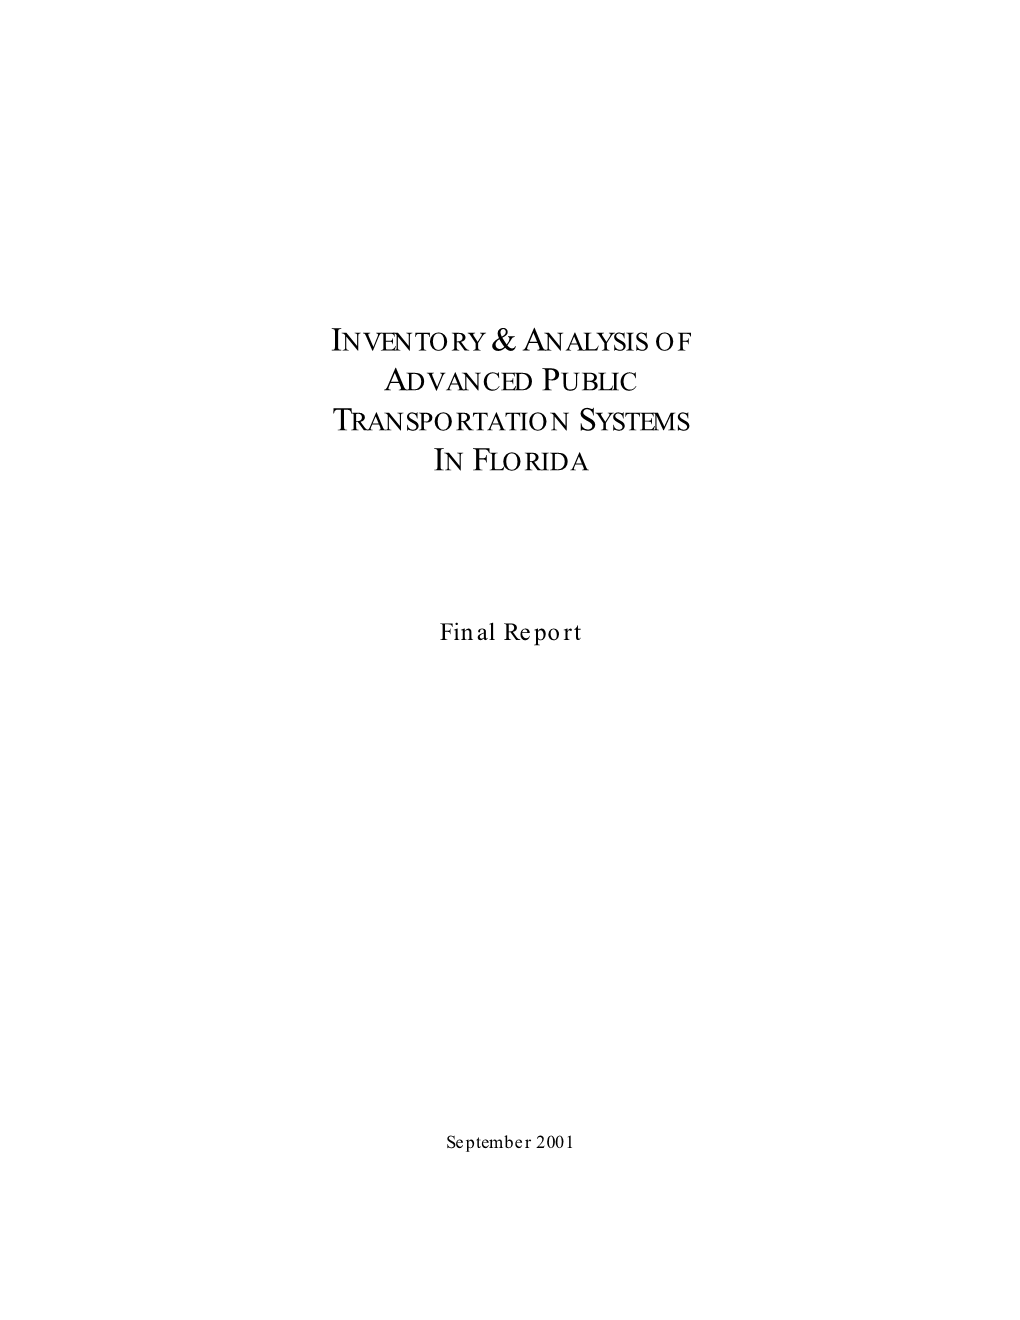 Inventory & Analysis of Advanced Public Transportation Systems in Florida